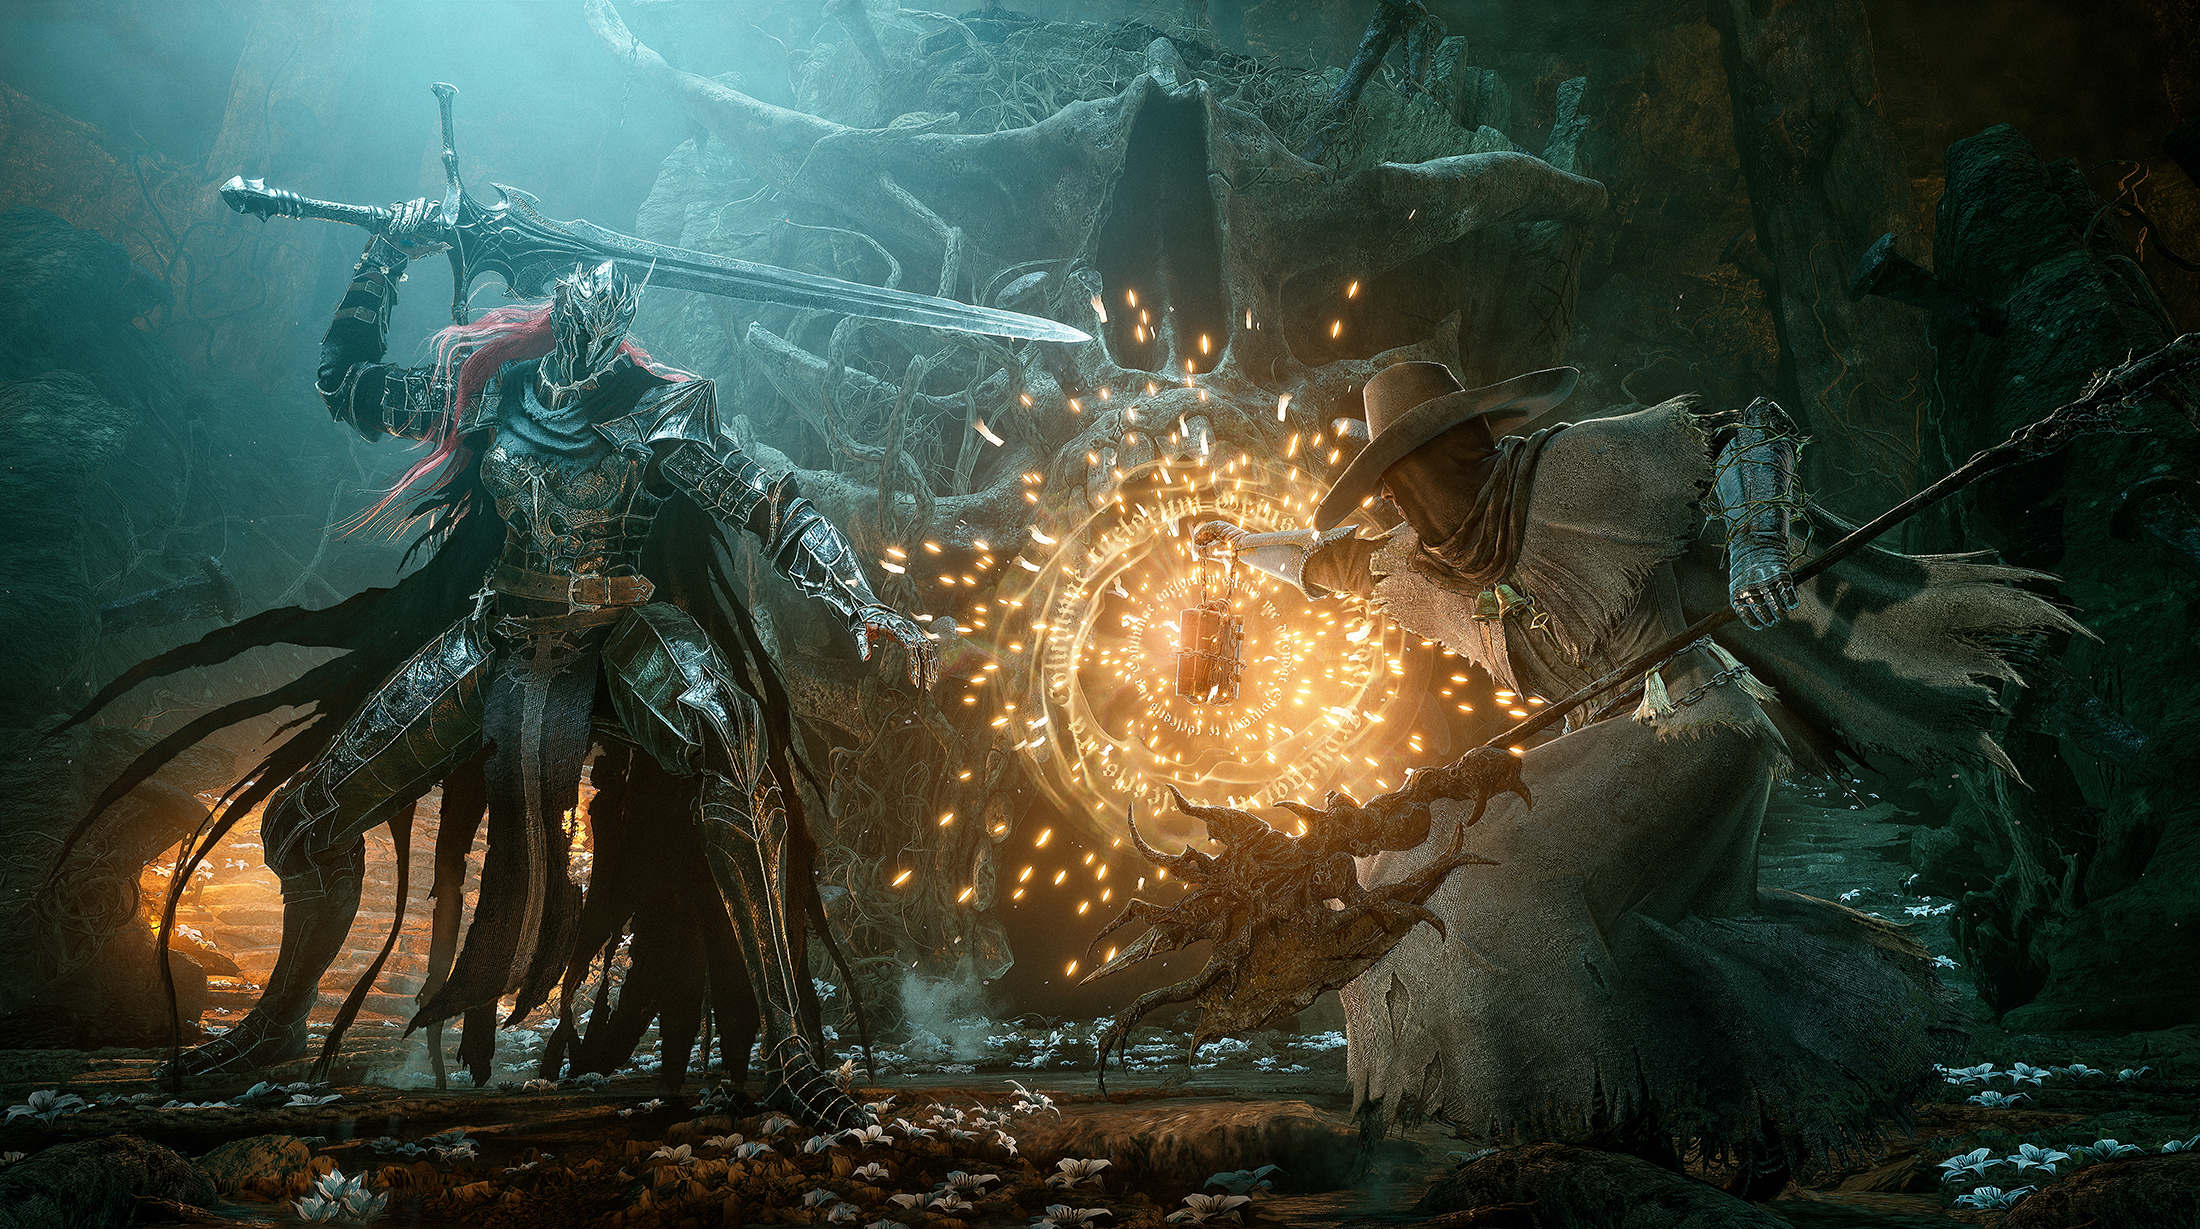  Lords of the Fallen's creative director showed me its 'horrible pains' and 'fingers of God' and I must see more 